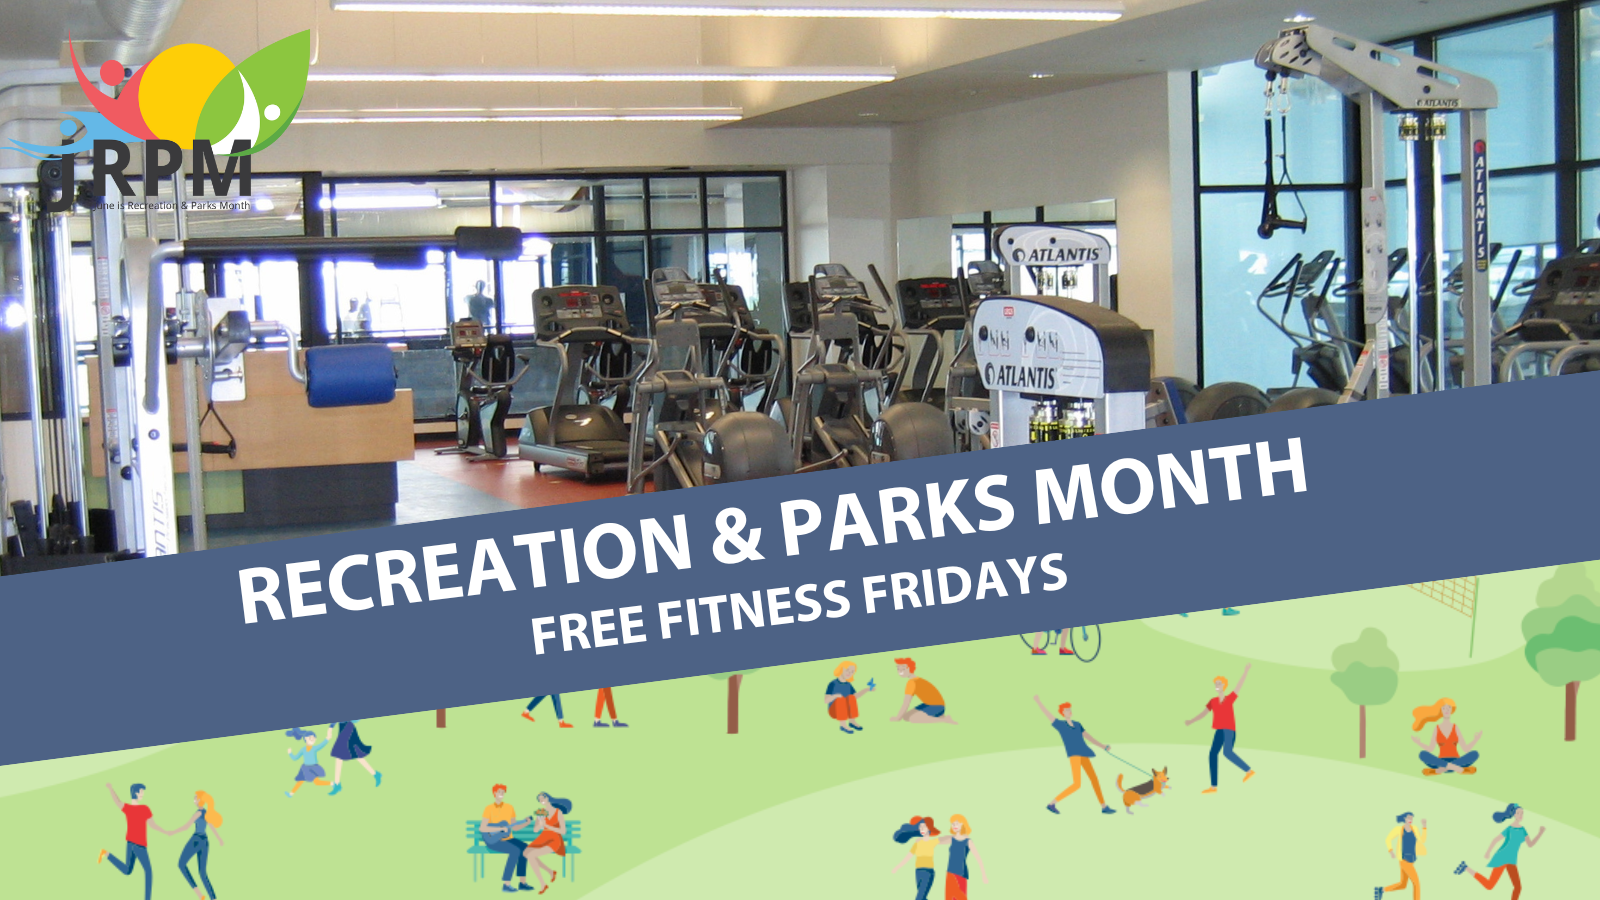 fitness equipment and the words Free Friday Fitness